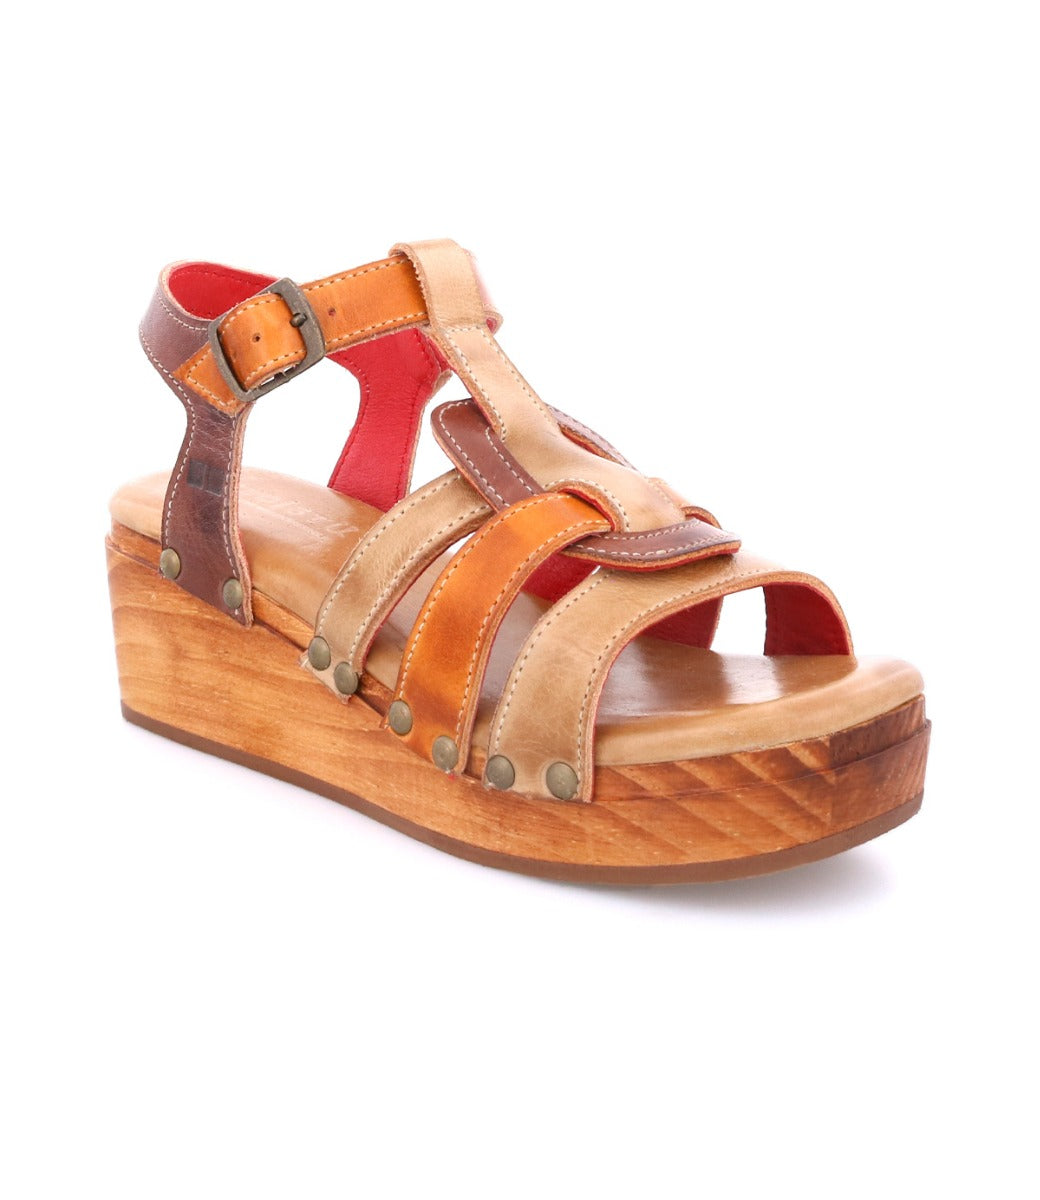 A women's Fabiola sandal with a wooden platform and straps by Bed Stu.